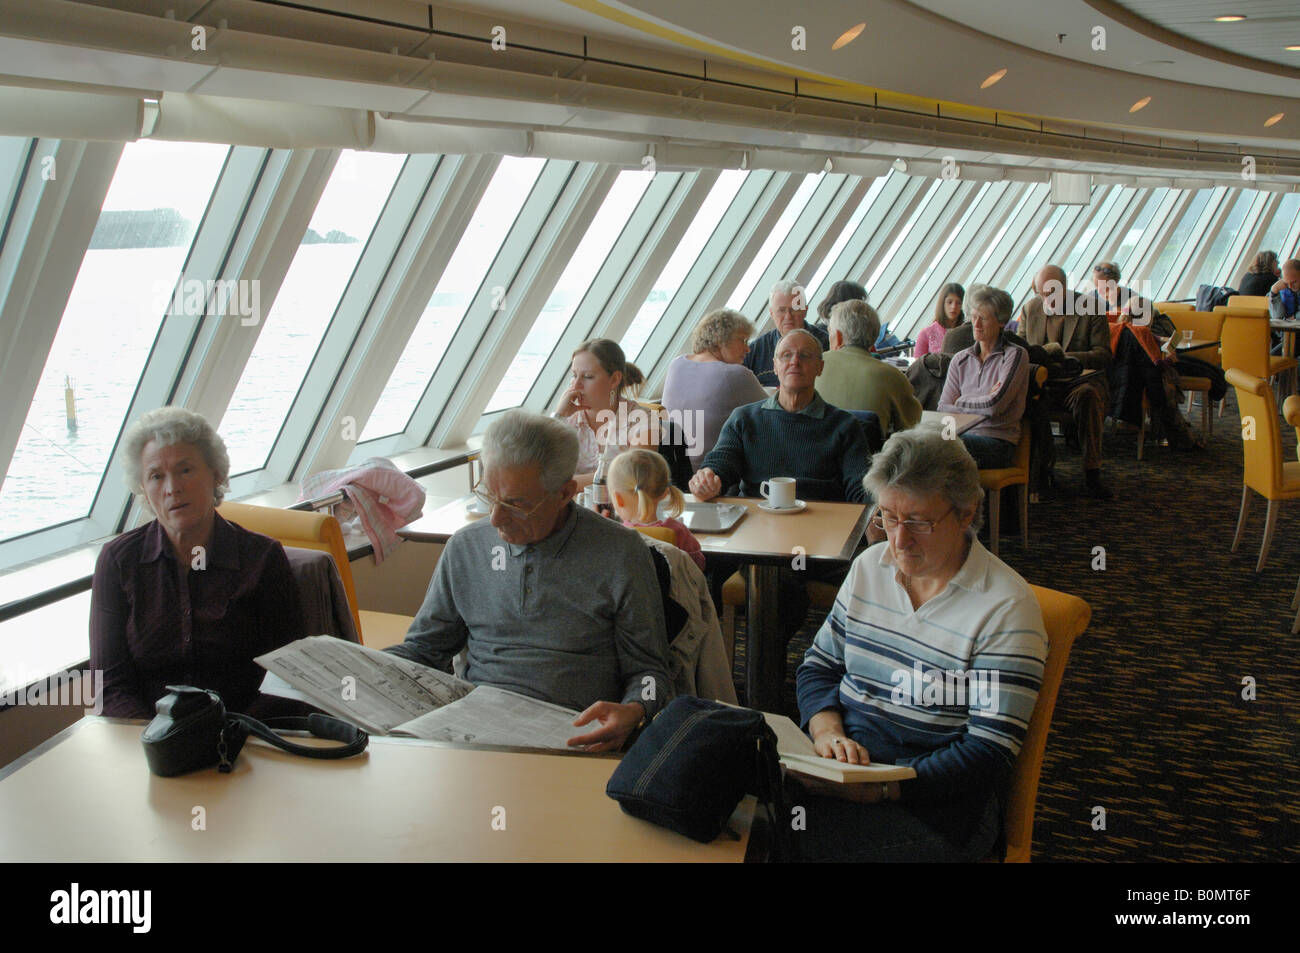 People sitting in restaurant Pont Aven ferry Brittany Ferries Plymouth to Roscoff crossing Atlantic Ocean Stock Photo